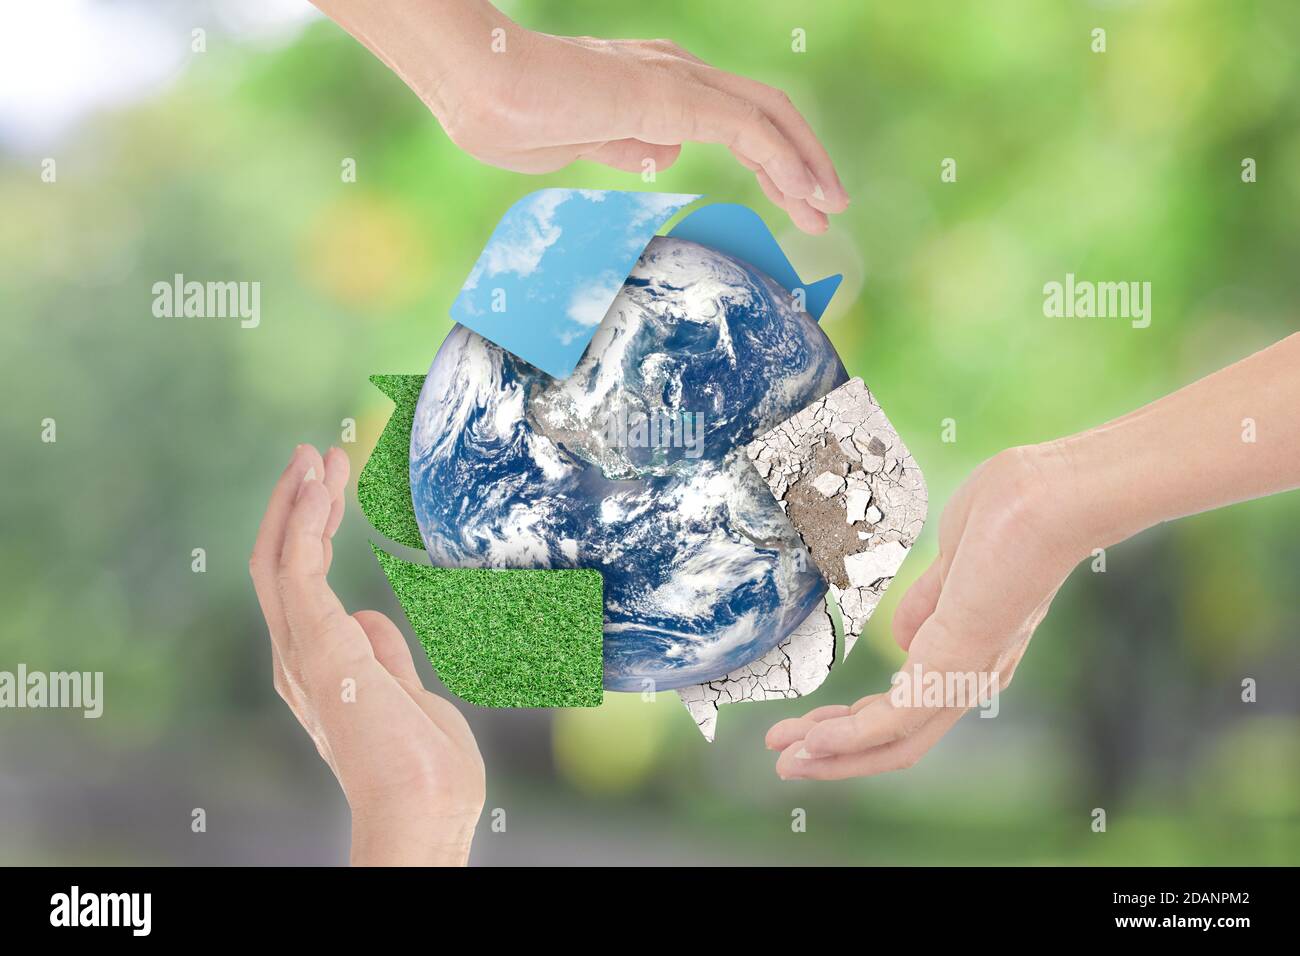 Recycle symbol and Earth in hands over green nature background. Environment concept. Elements of this image furnished by NASA Stock Photo